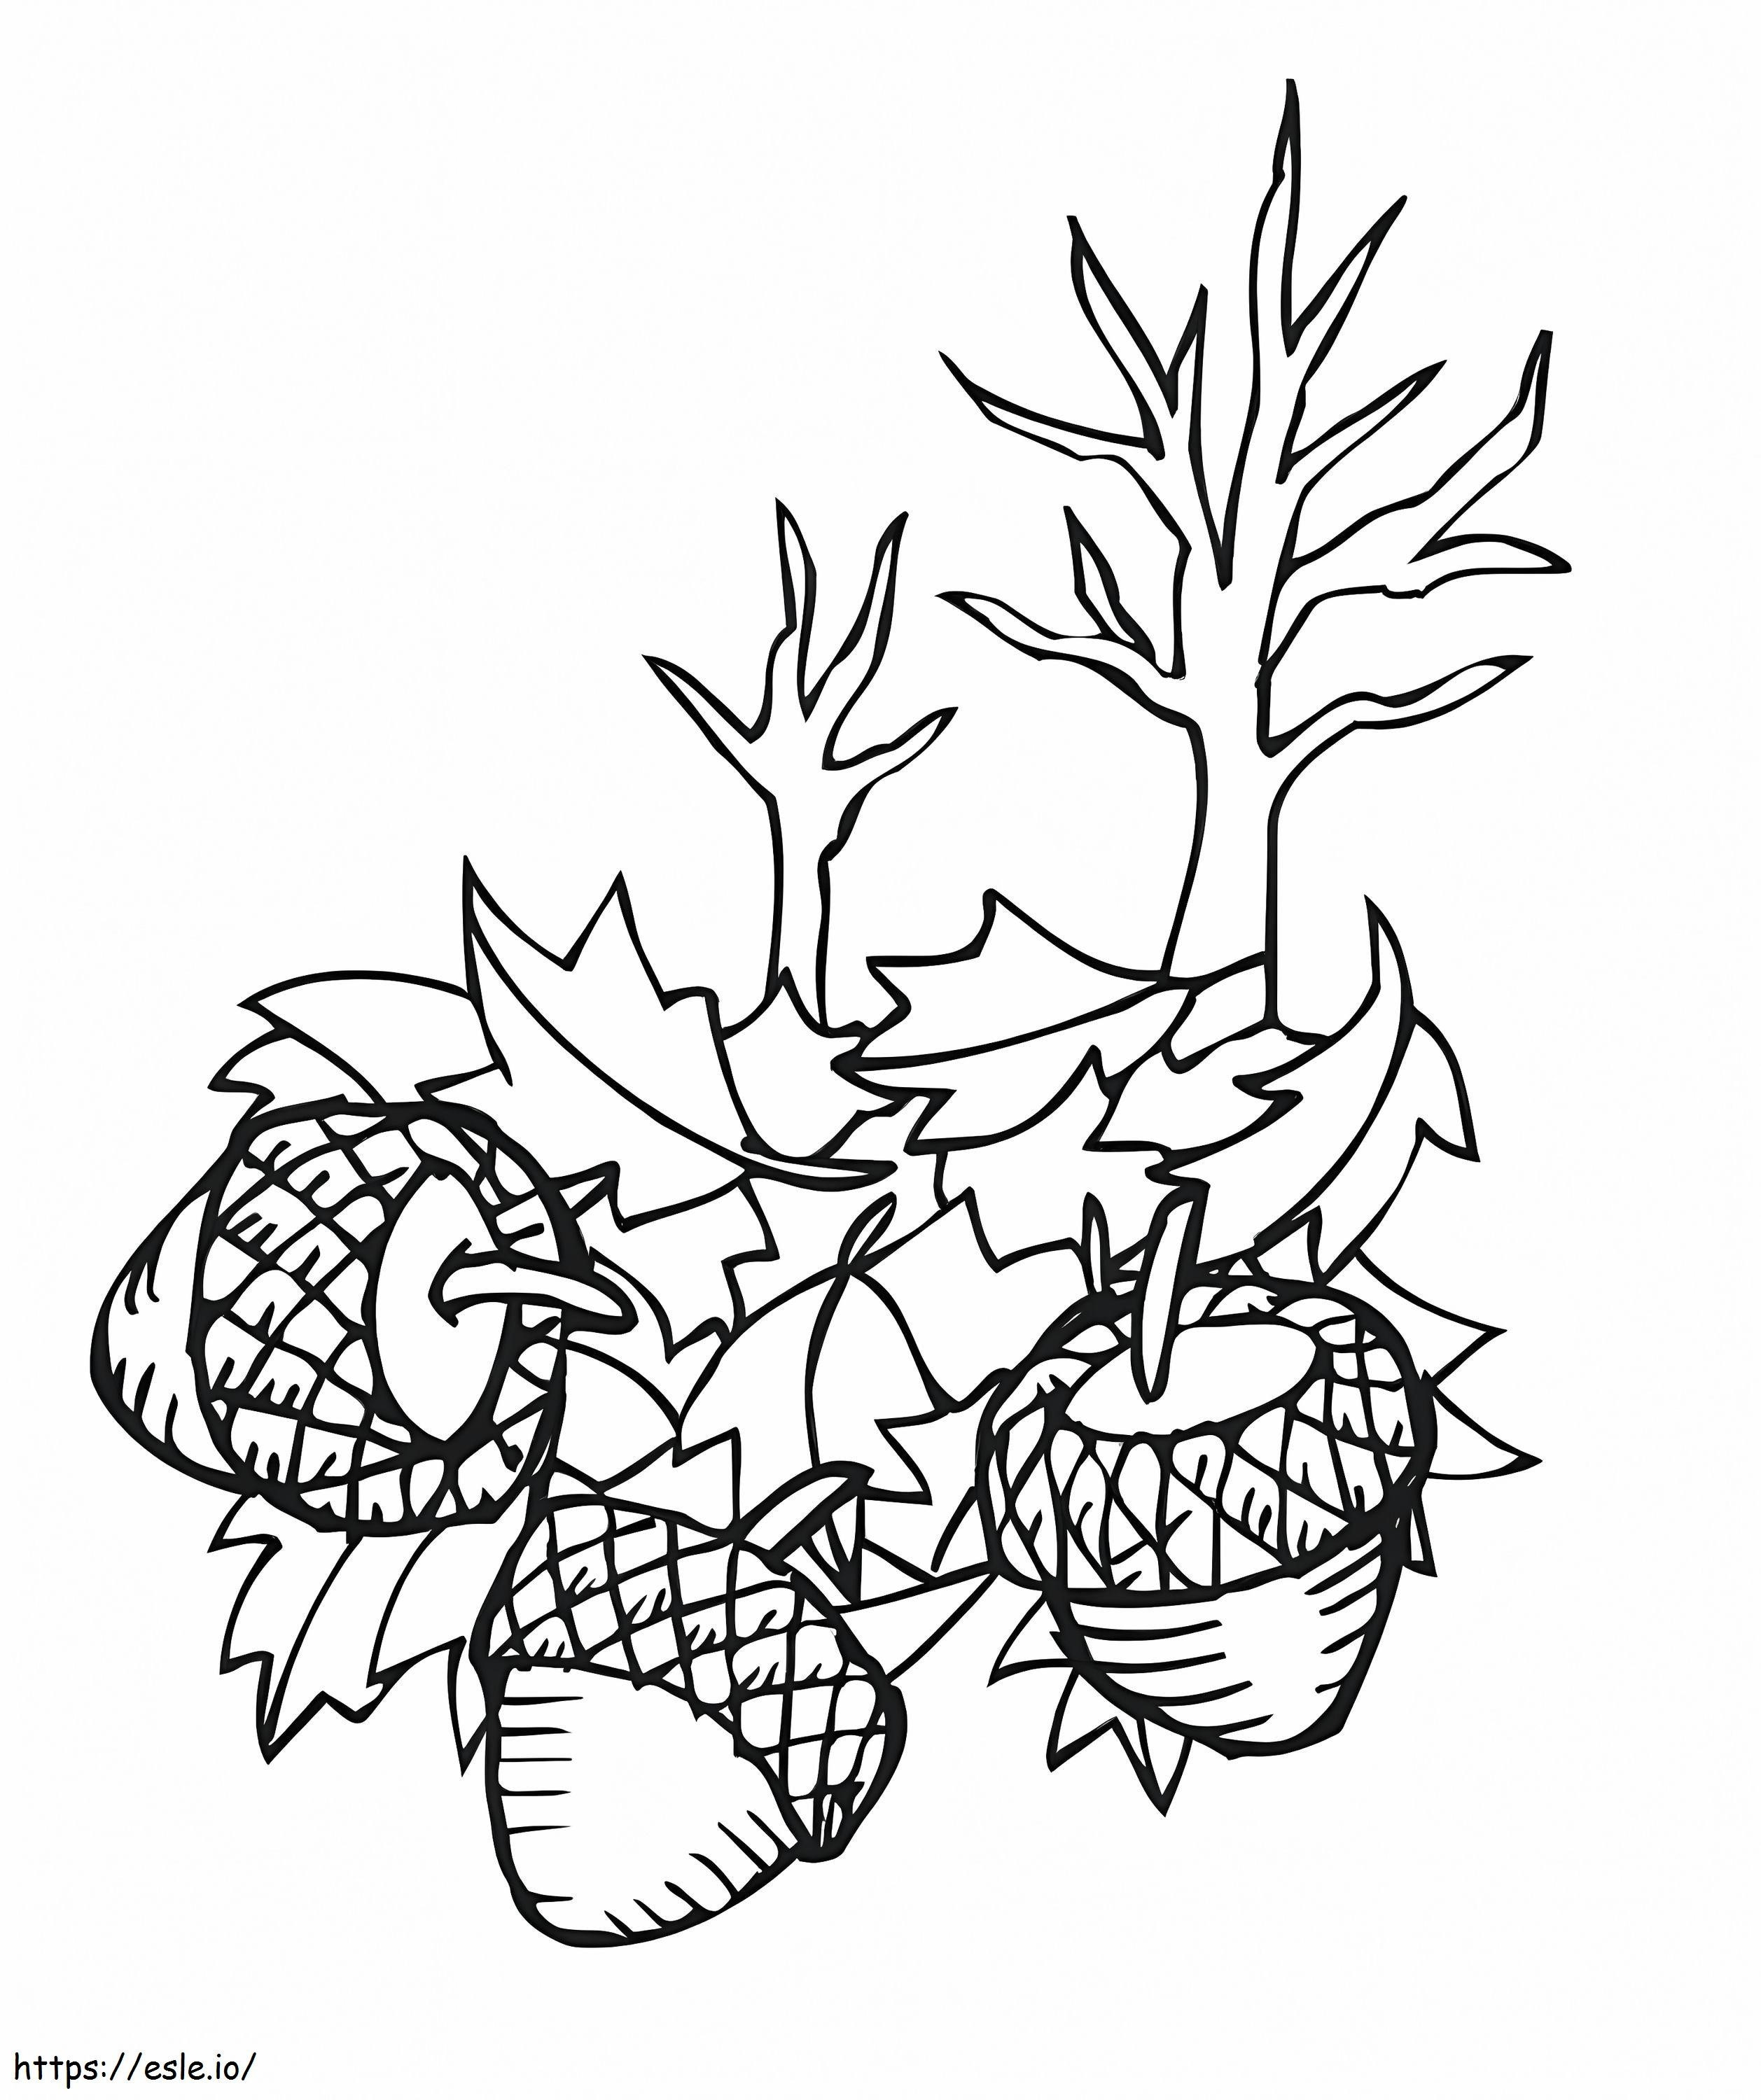 Leaves And Acorns coloring page